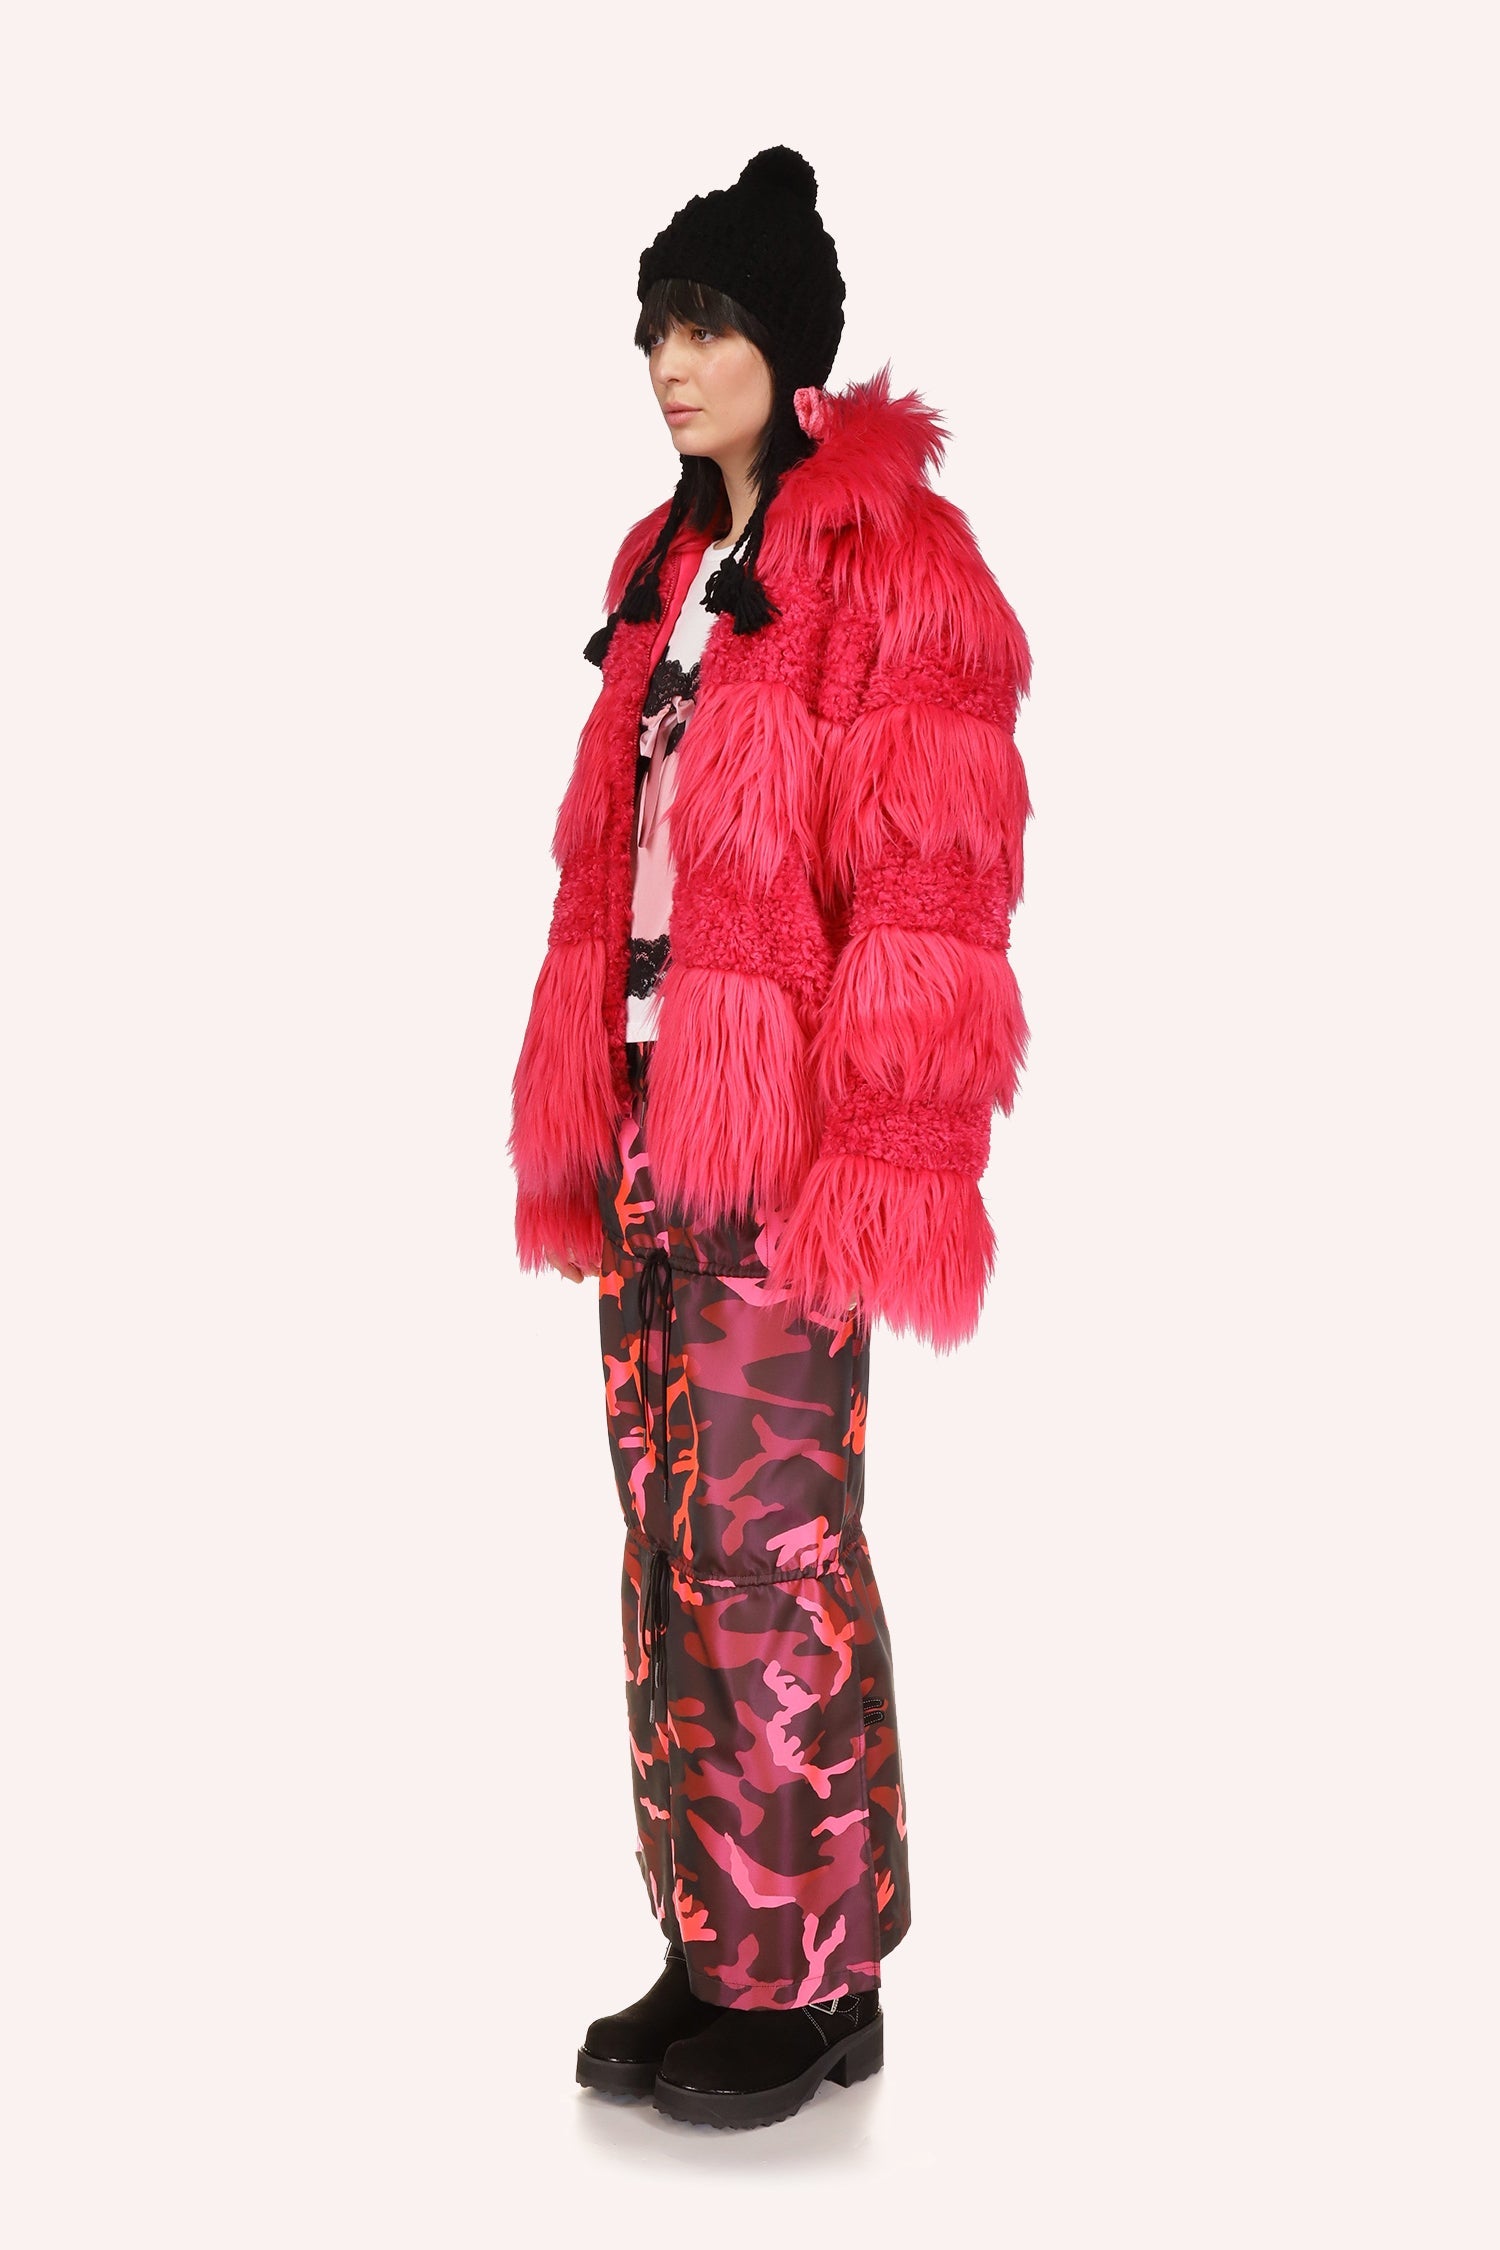 Anna Sui Pink jacket, hips long, long sleeve, large collar, 3-layers of pink material